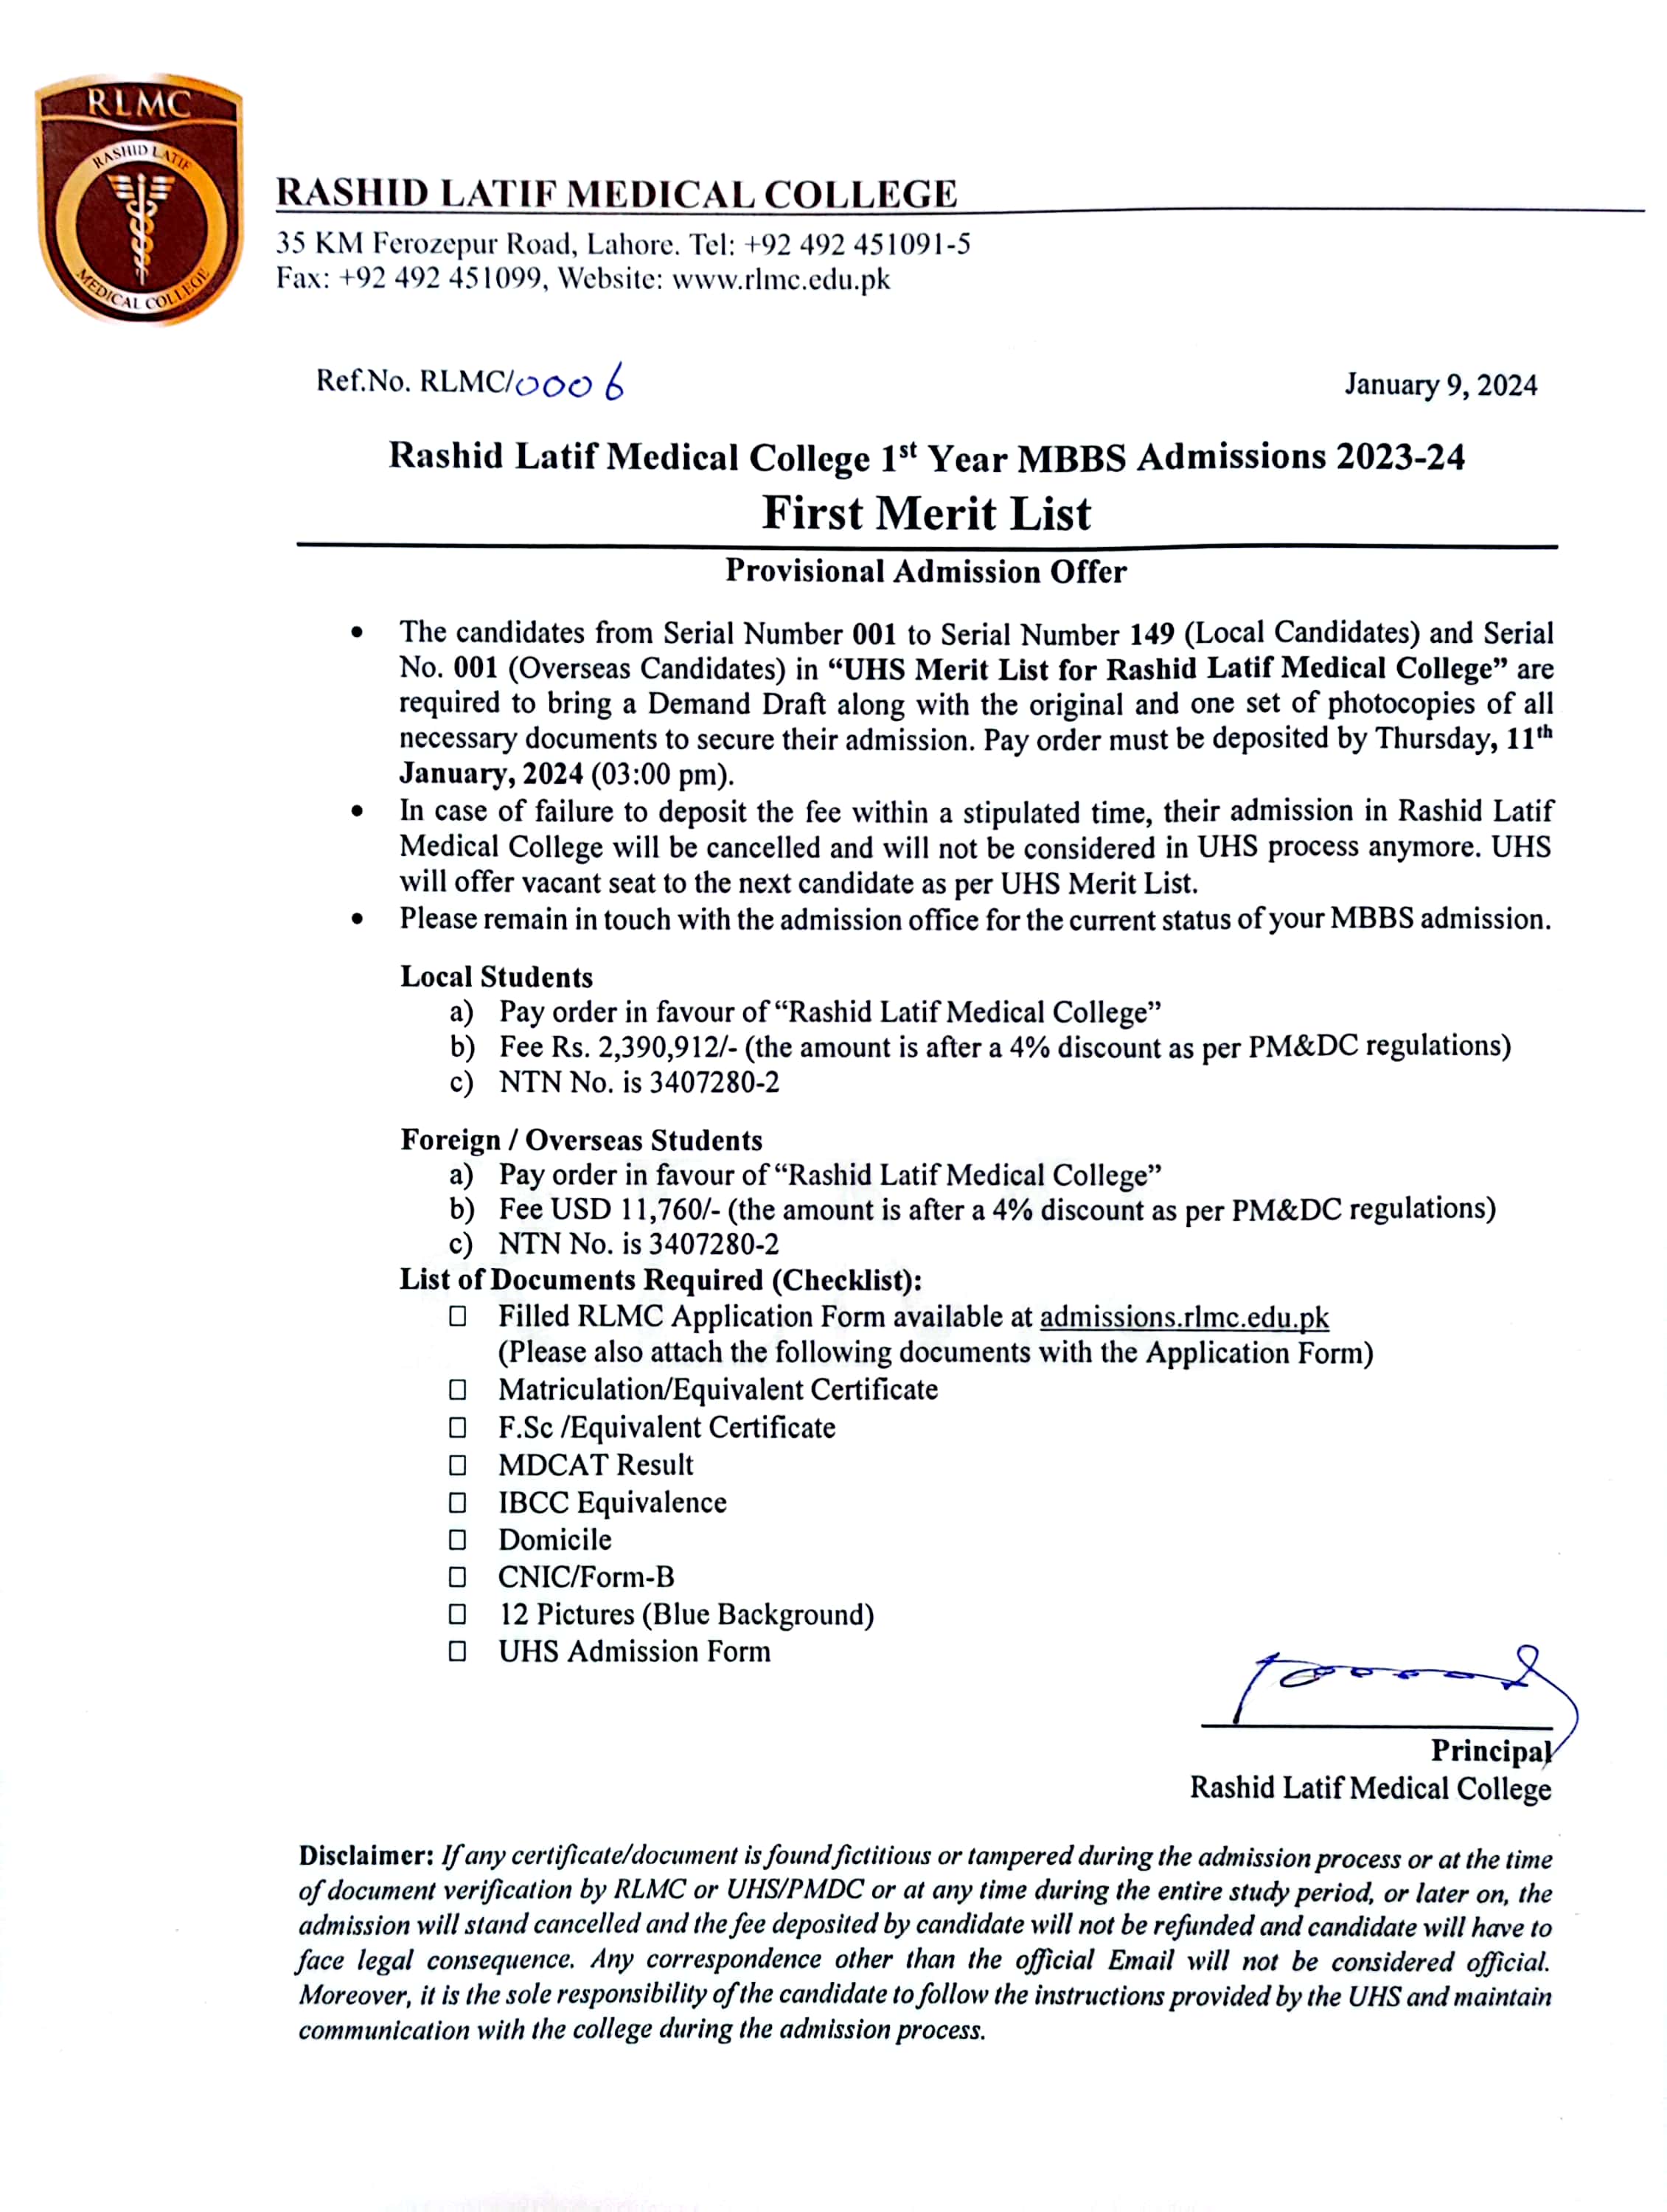 Notice for MBBS Selected Candidates